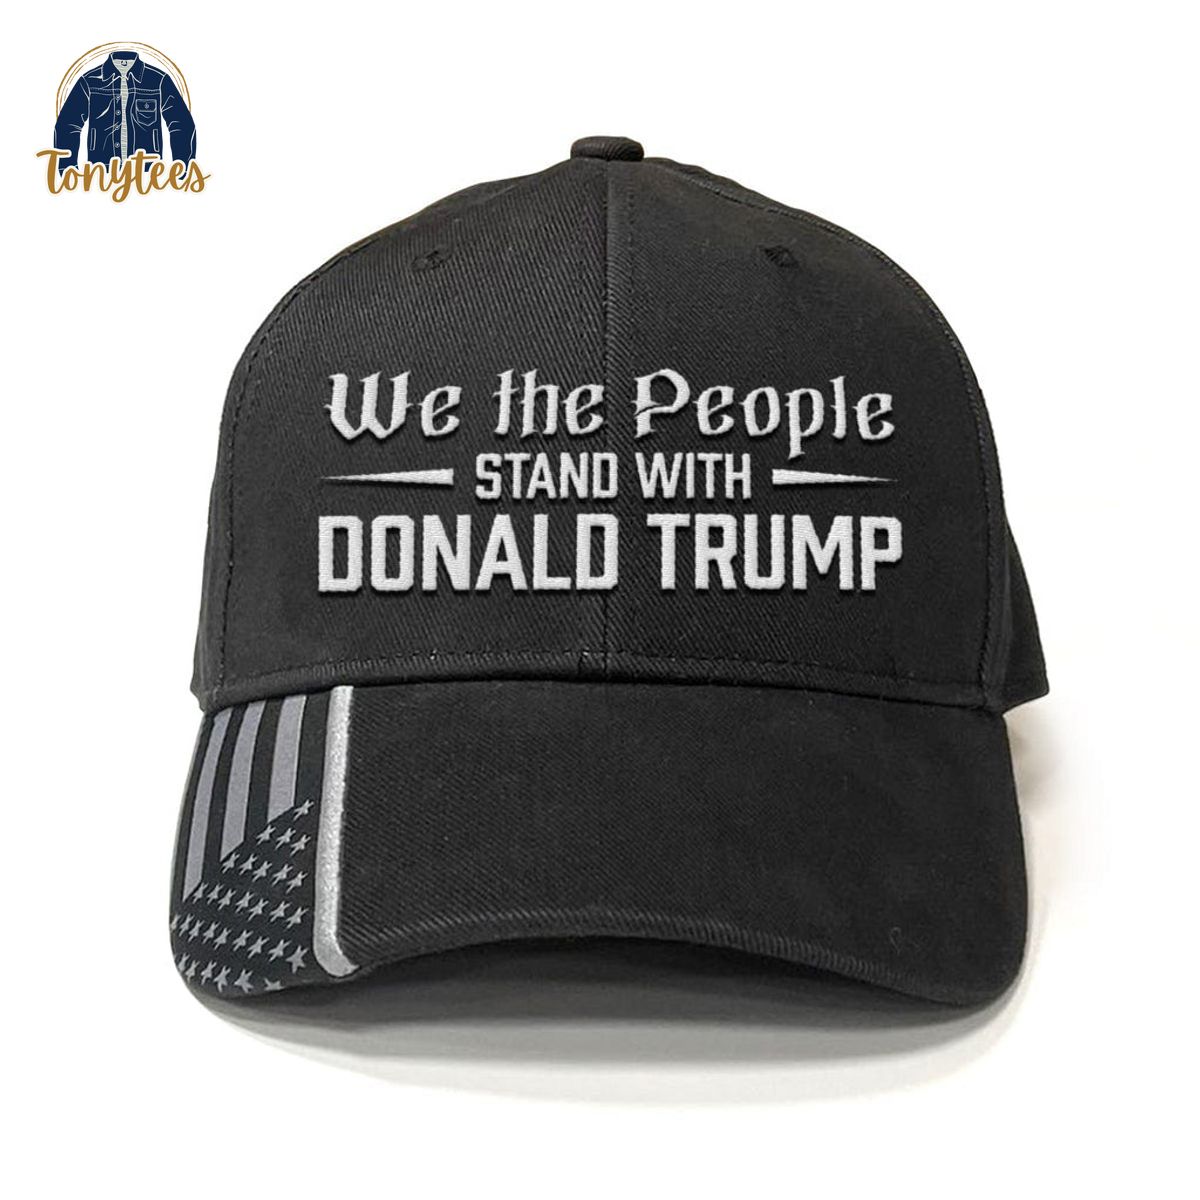 We the People Stand With Donald Trump Classic Cap